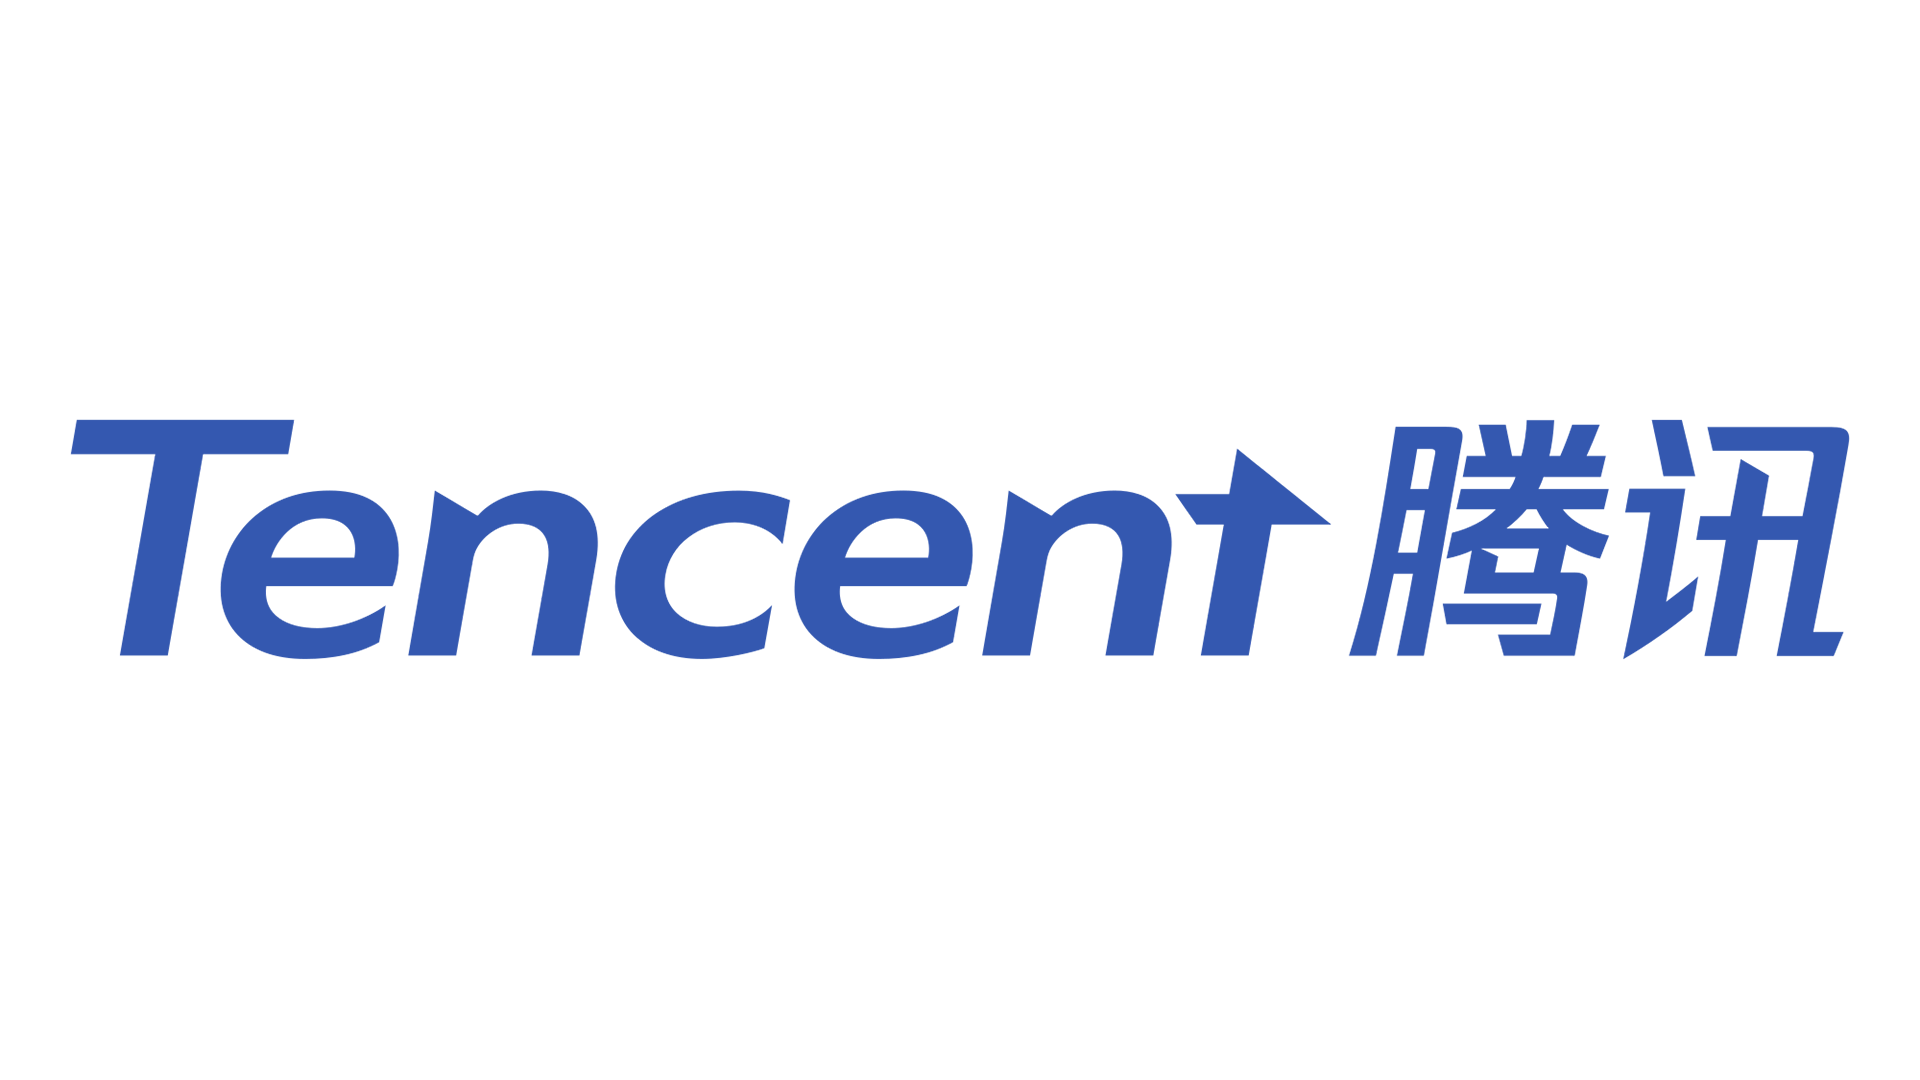 Tencent Logo - Tencent logo, symbol, meaning, History and Evolution